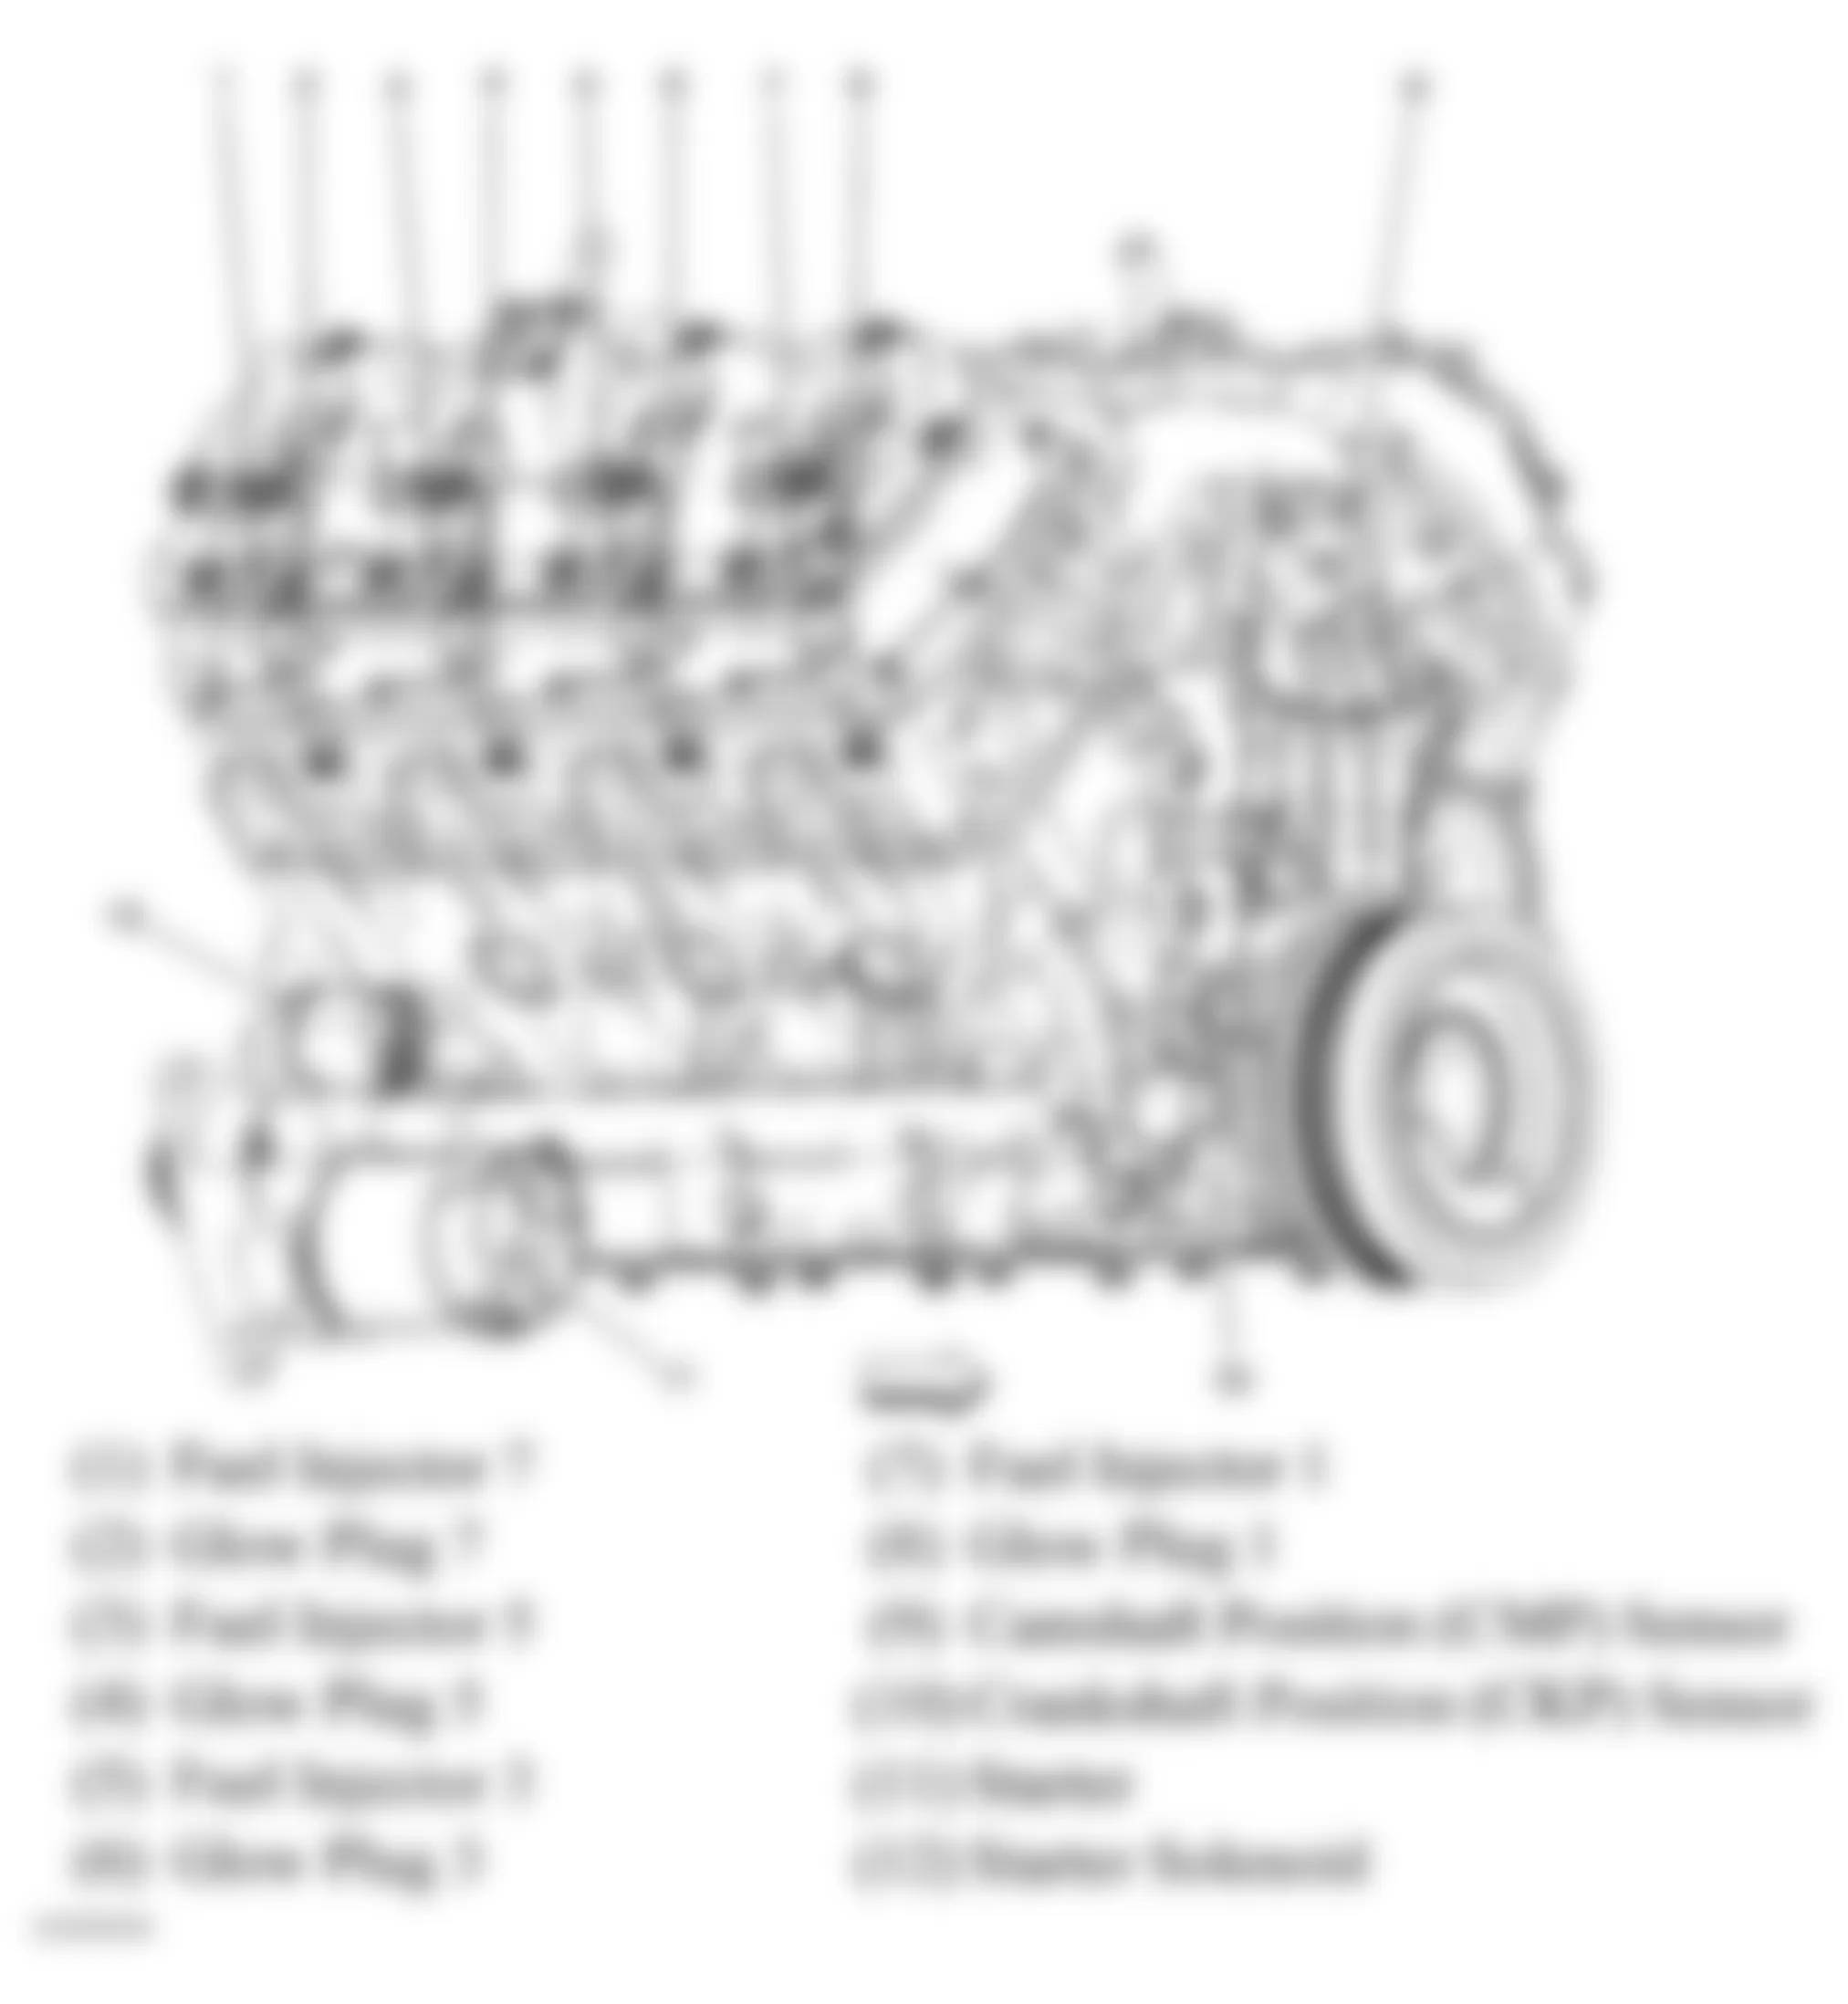 GMC Savana G3500 2010 - Component Locations -  Right Side Of Engine (6.6L)